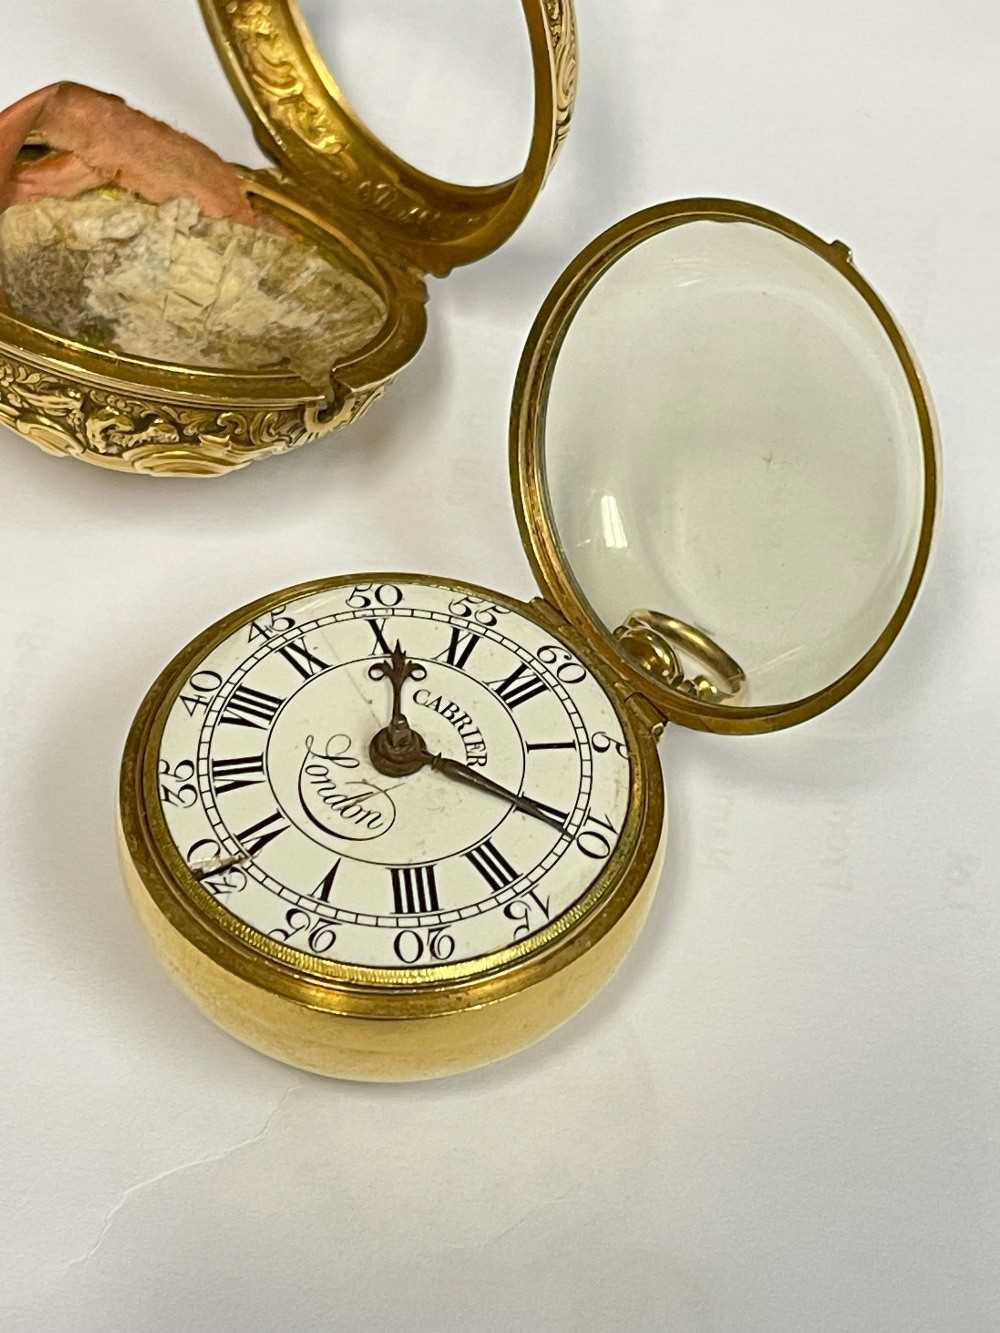 MID-18TH C. GOLD PAIR CASED POCKET WATCH, Charles Cabrier, London 1750, with white enamel dial, - Image 6 of 12